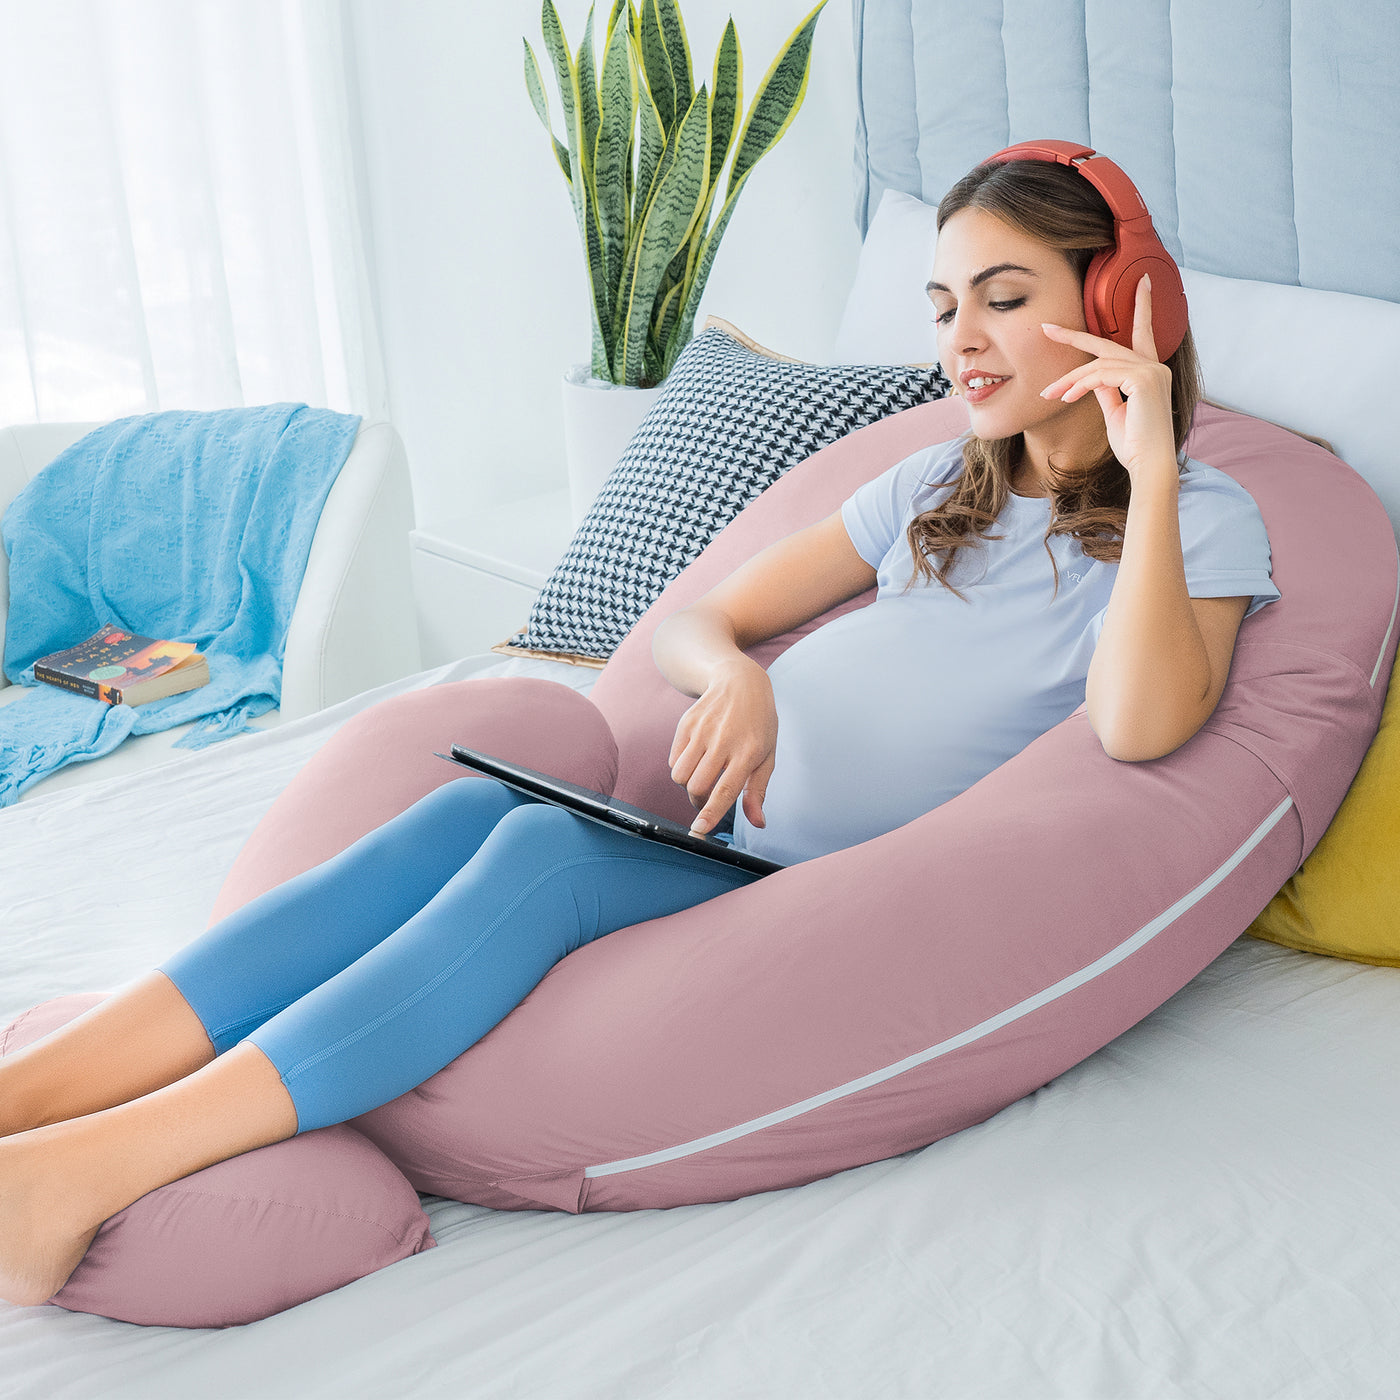 E-Shaped Pregnancy Pillow, Silky Cooling Jersey